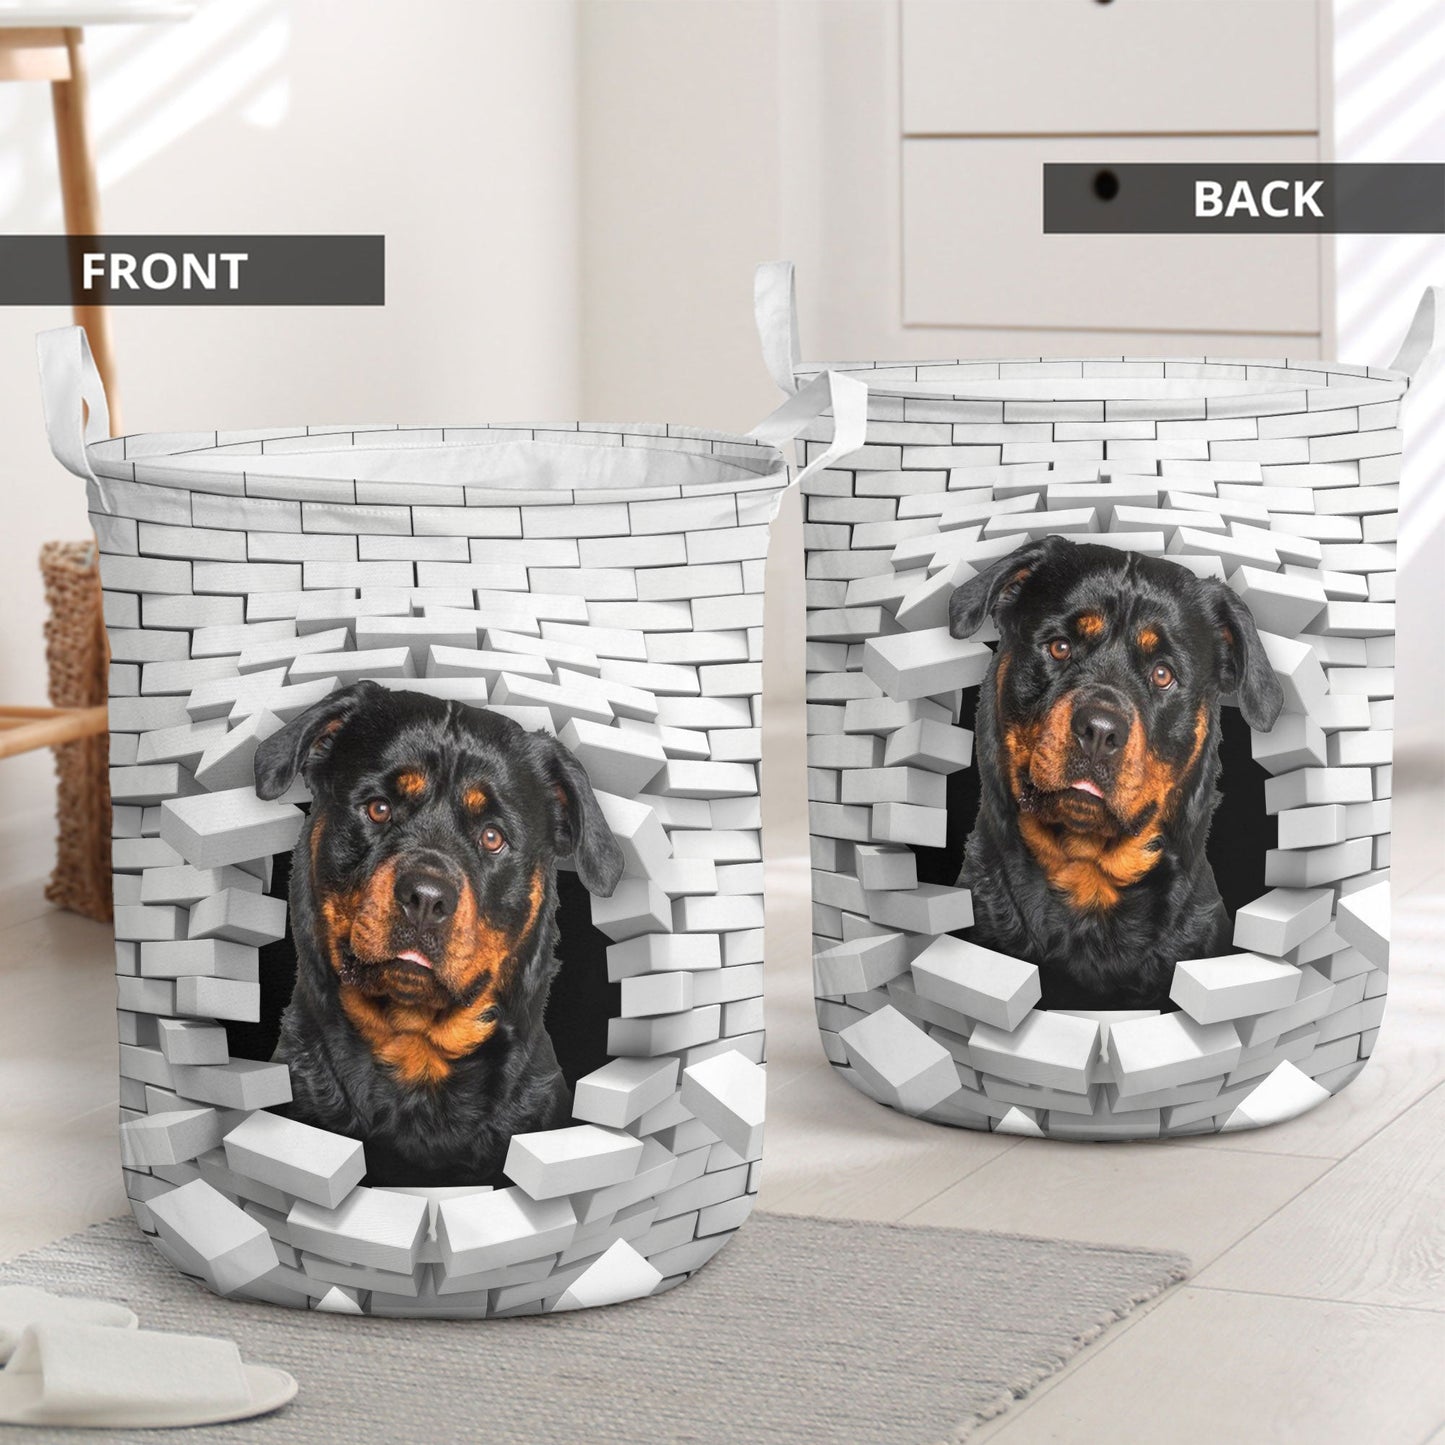 Rottweiler - In The Hole Of Wall Pattern Laundry Basket